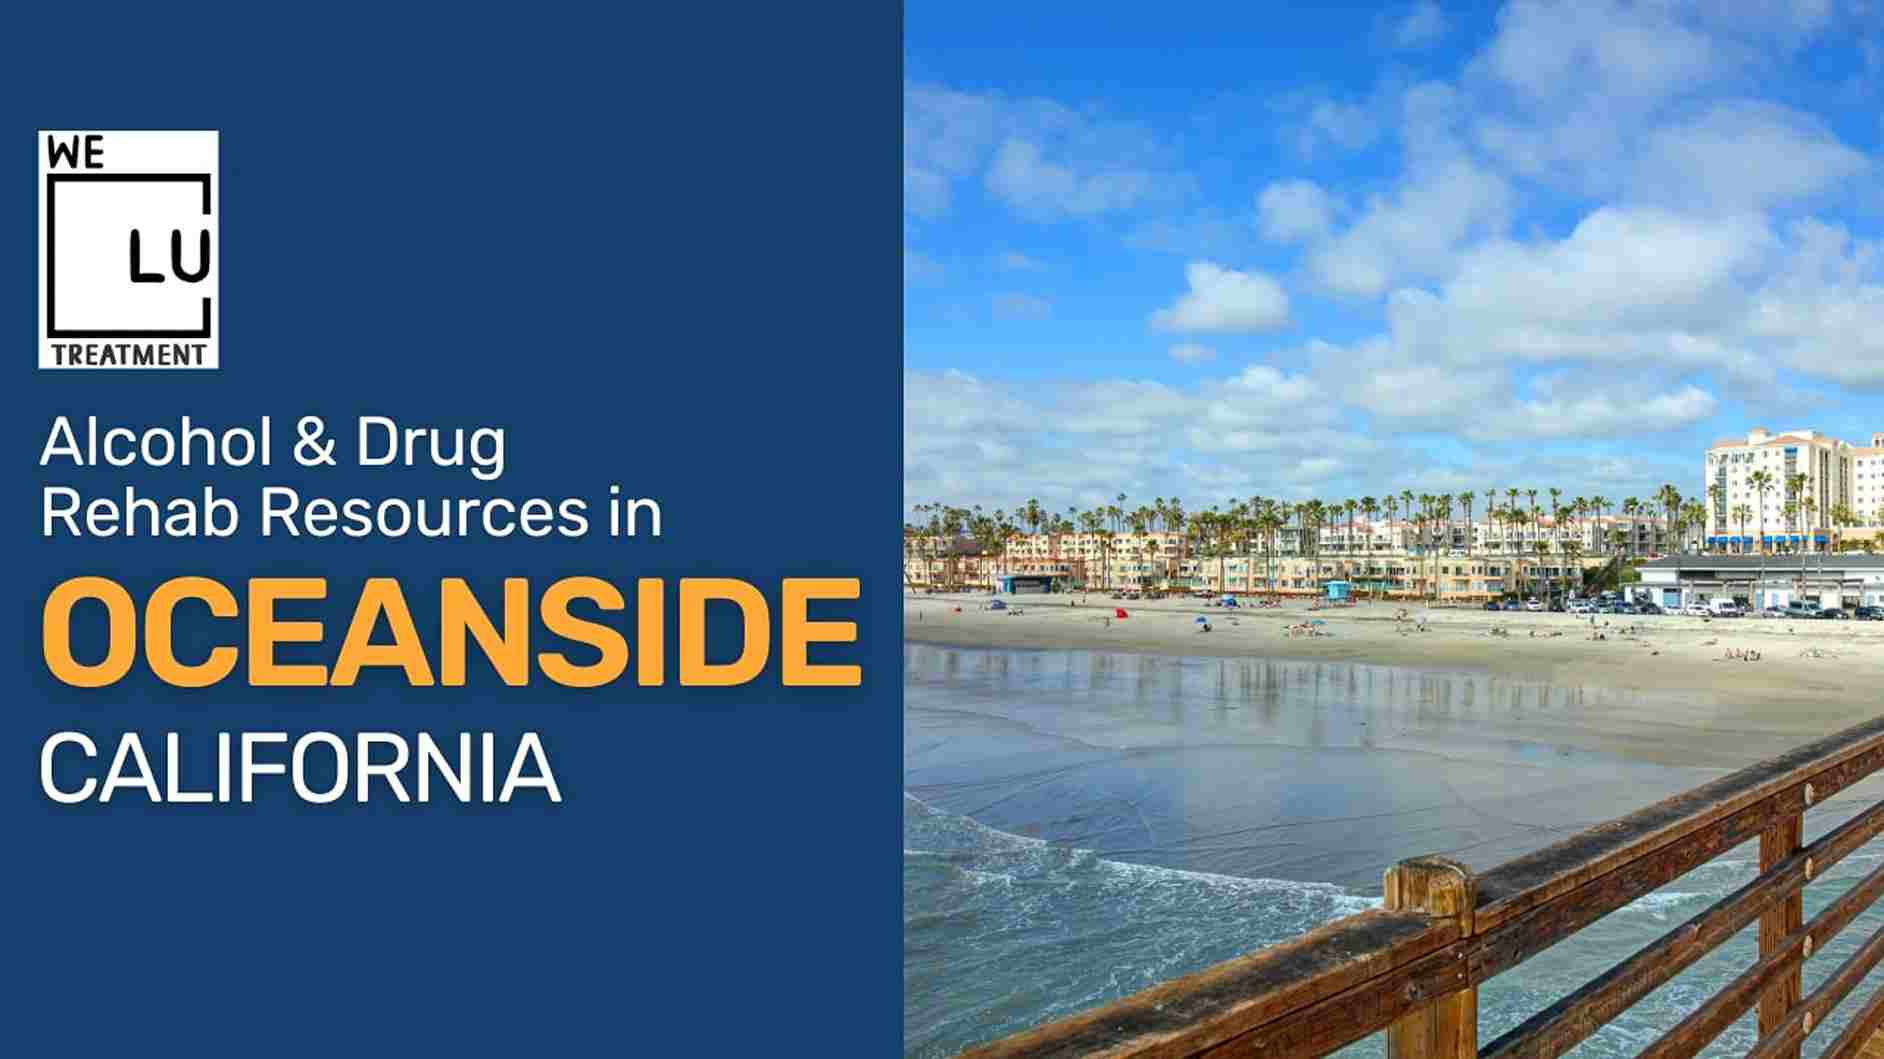 Oceanside CA We Level Up treatment center for drug and alcohol rehab detox and mental health services - Image 1